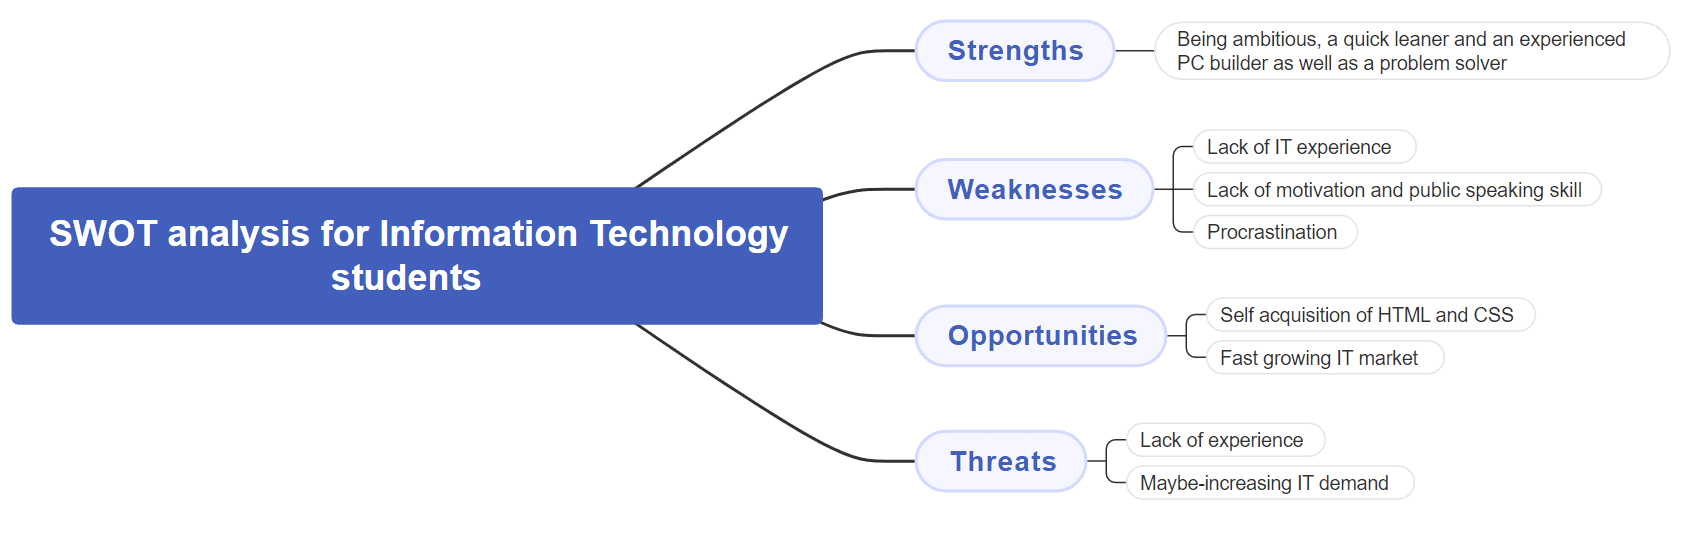 SWOT analysis for IT students